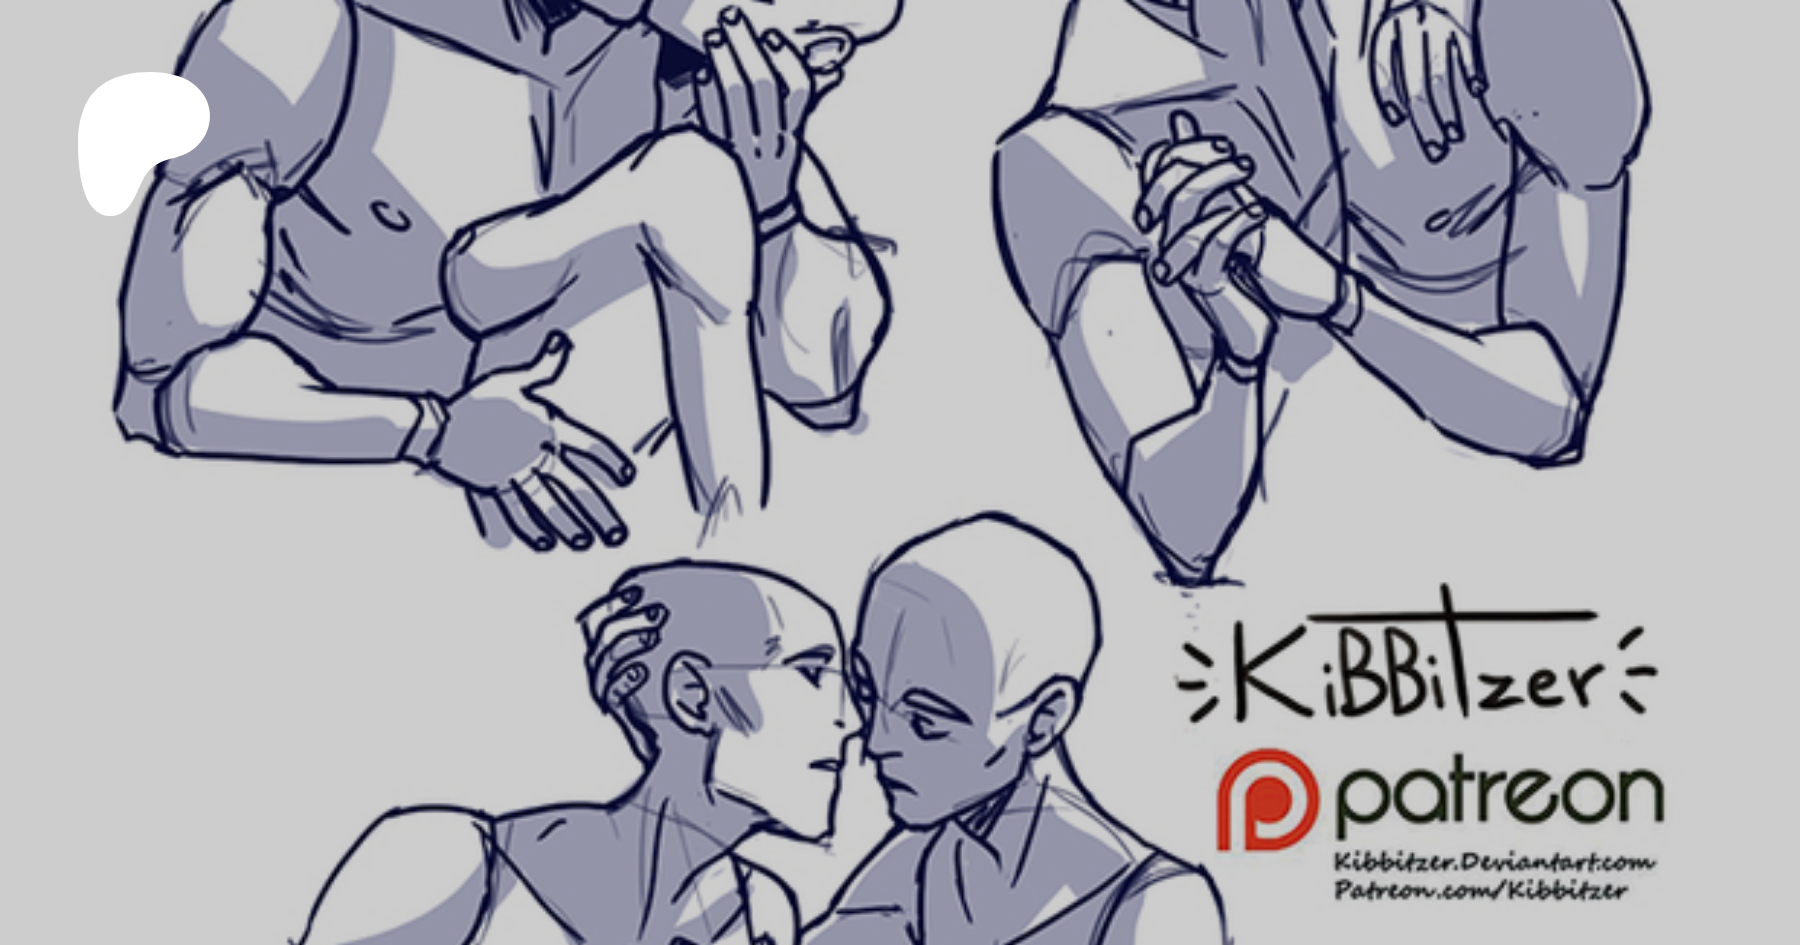 couples pose references for artists